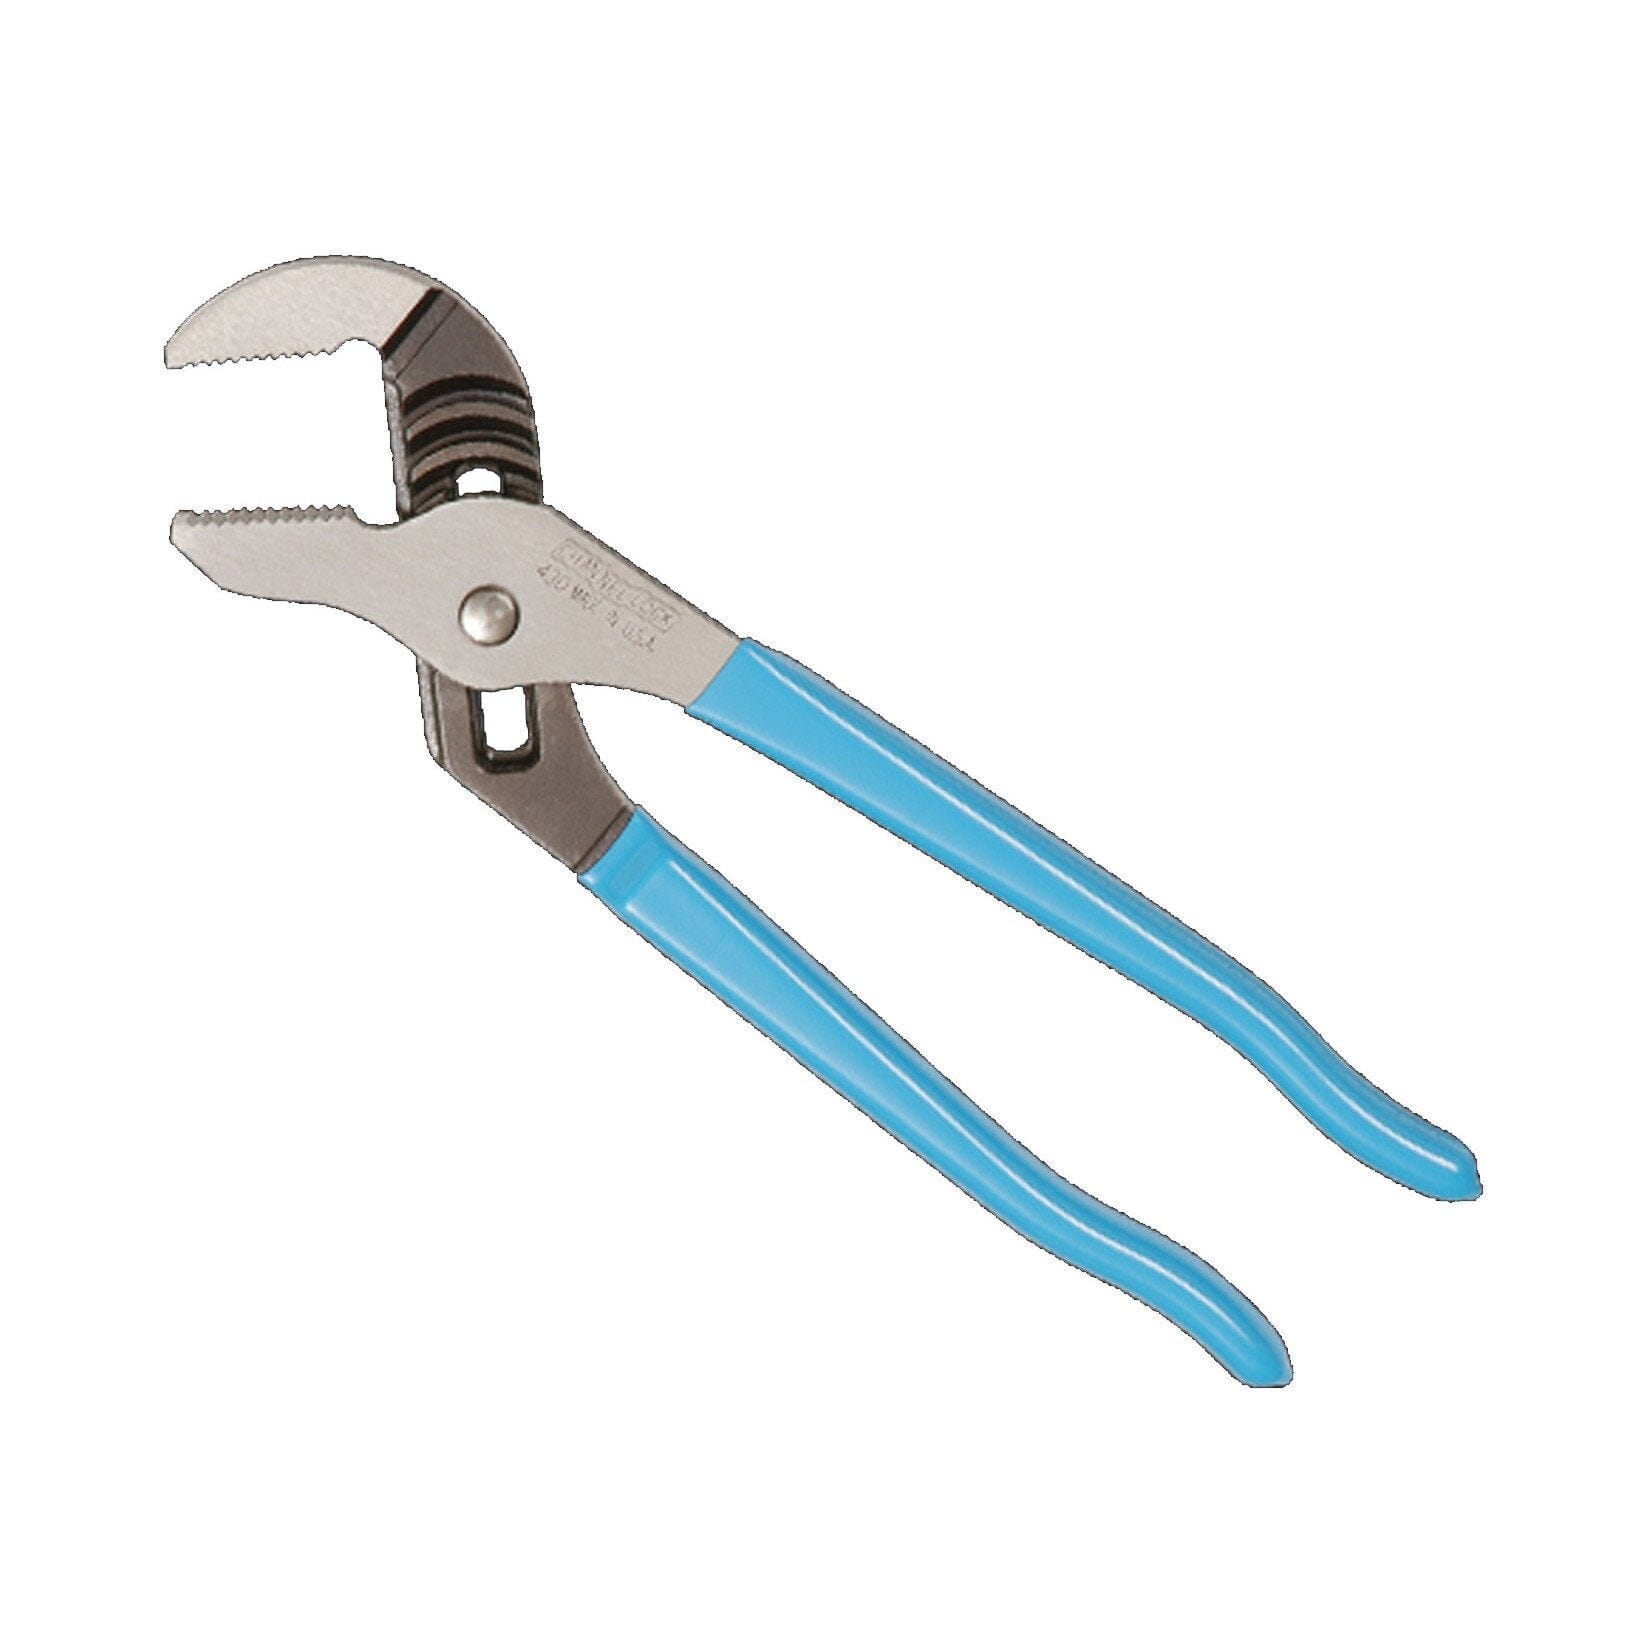 Channellock 430 10 Tongue & Groove Pliers